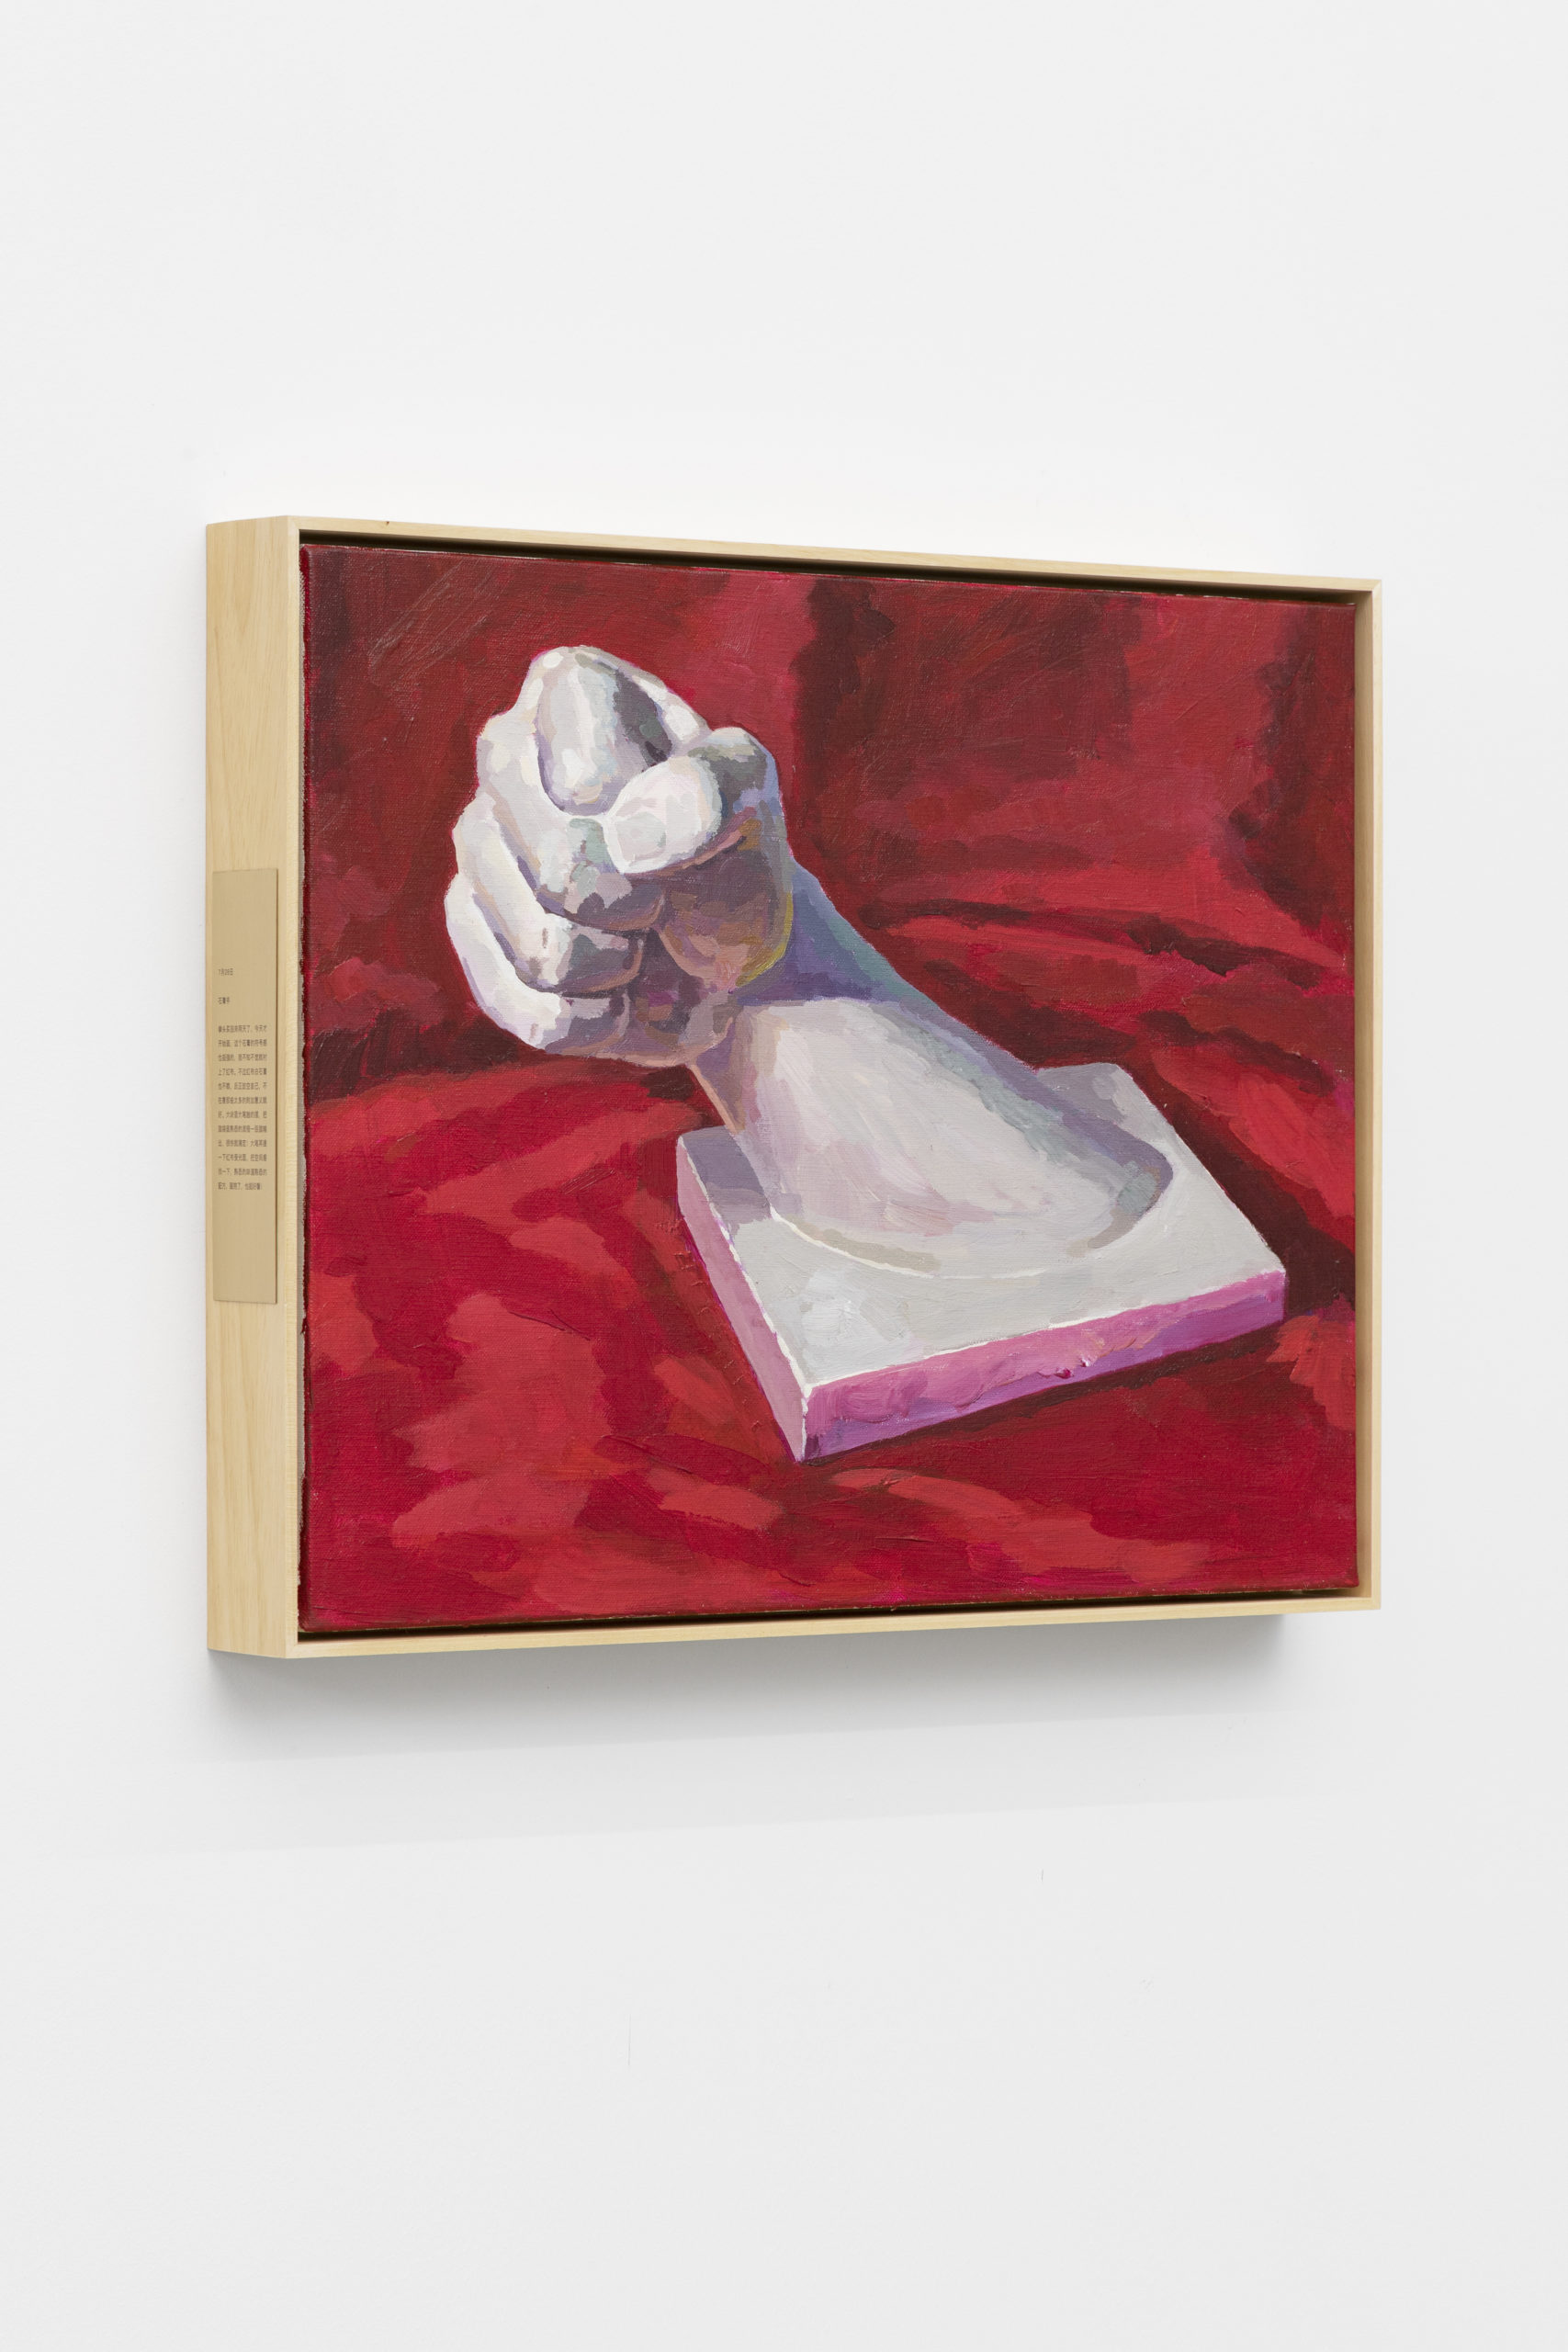 A painting fone by the artist Ge Yulu, a red backdrop is painted with a marble or plaster cast white fist in the foreground.